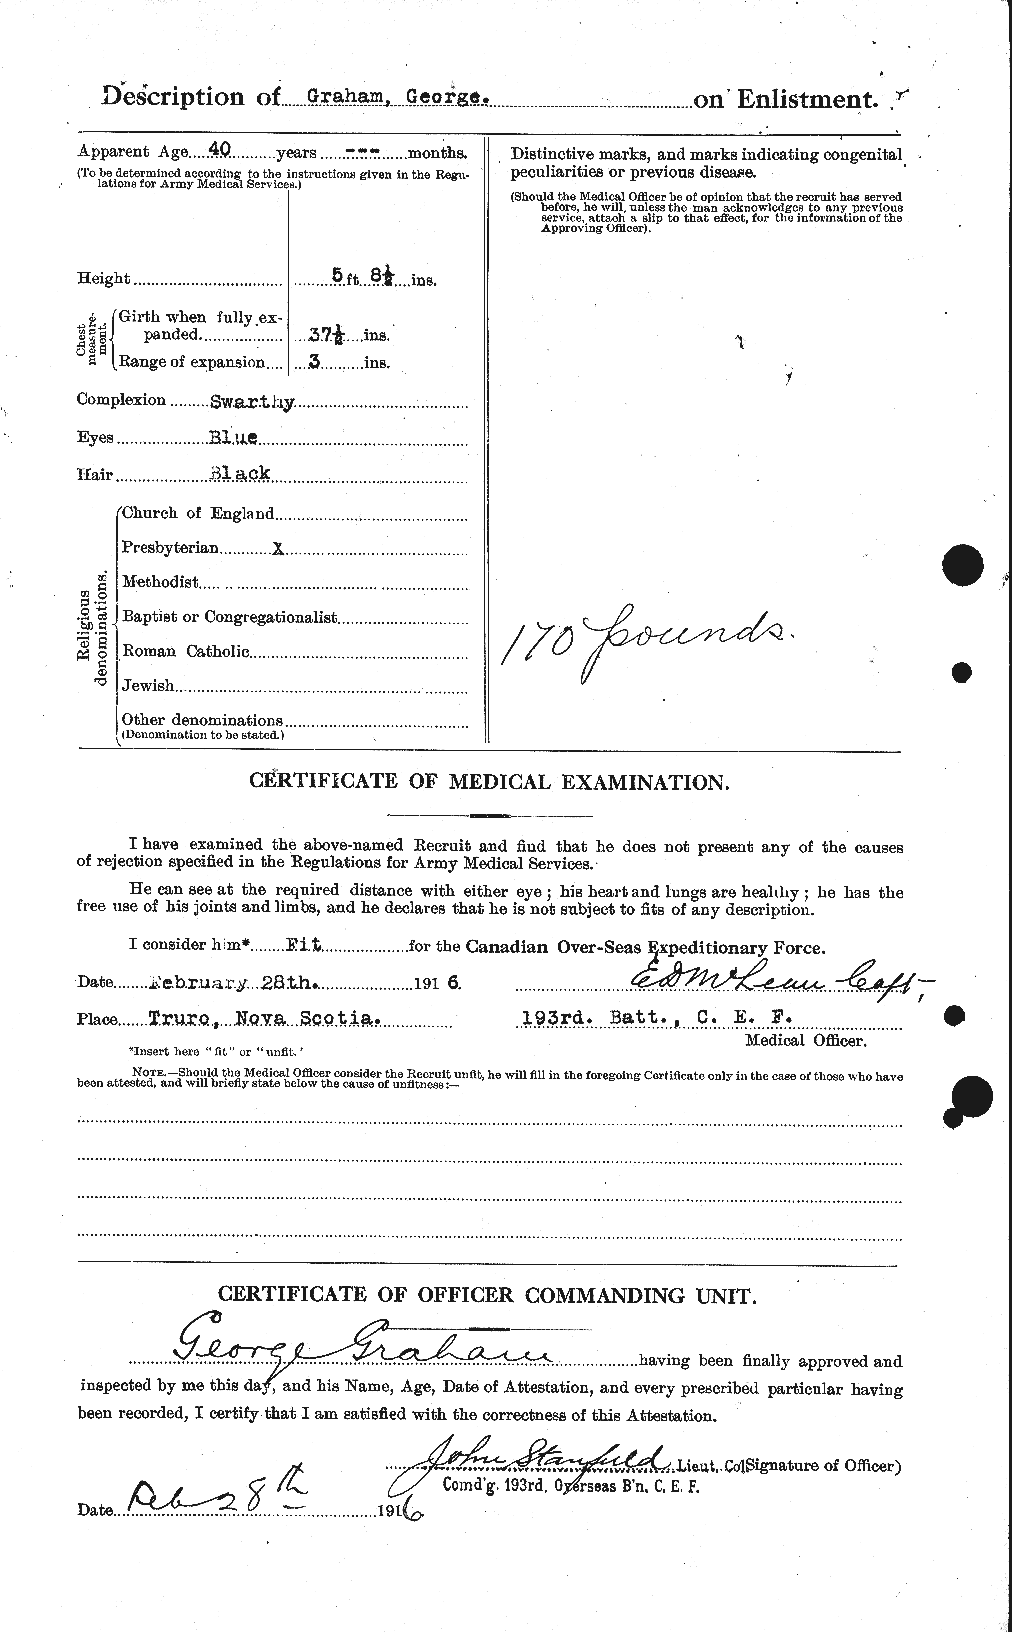 Personnel Records of the First World War - CEF 357630b